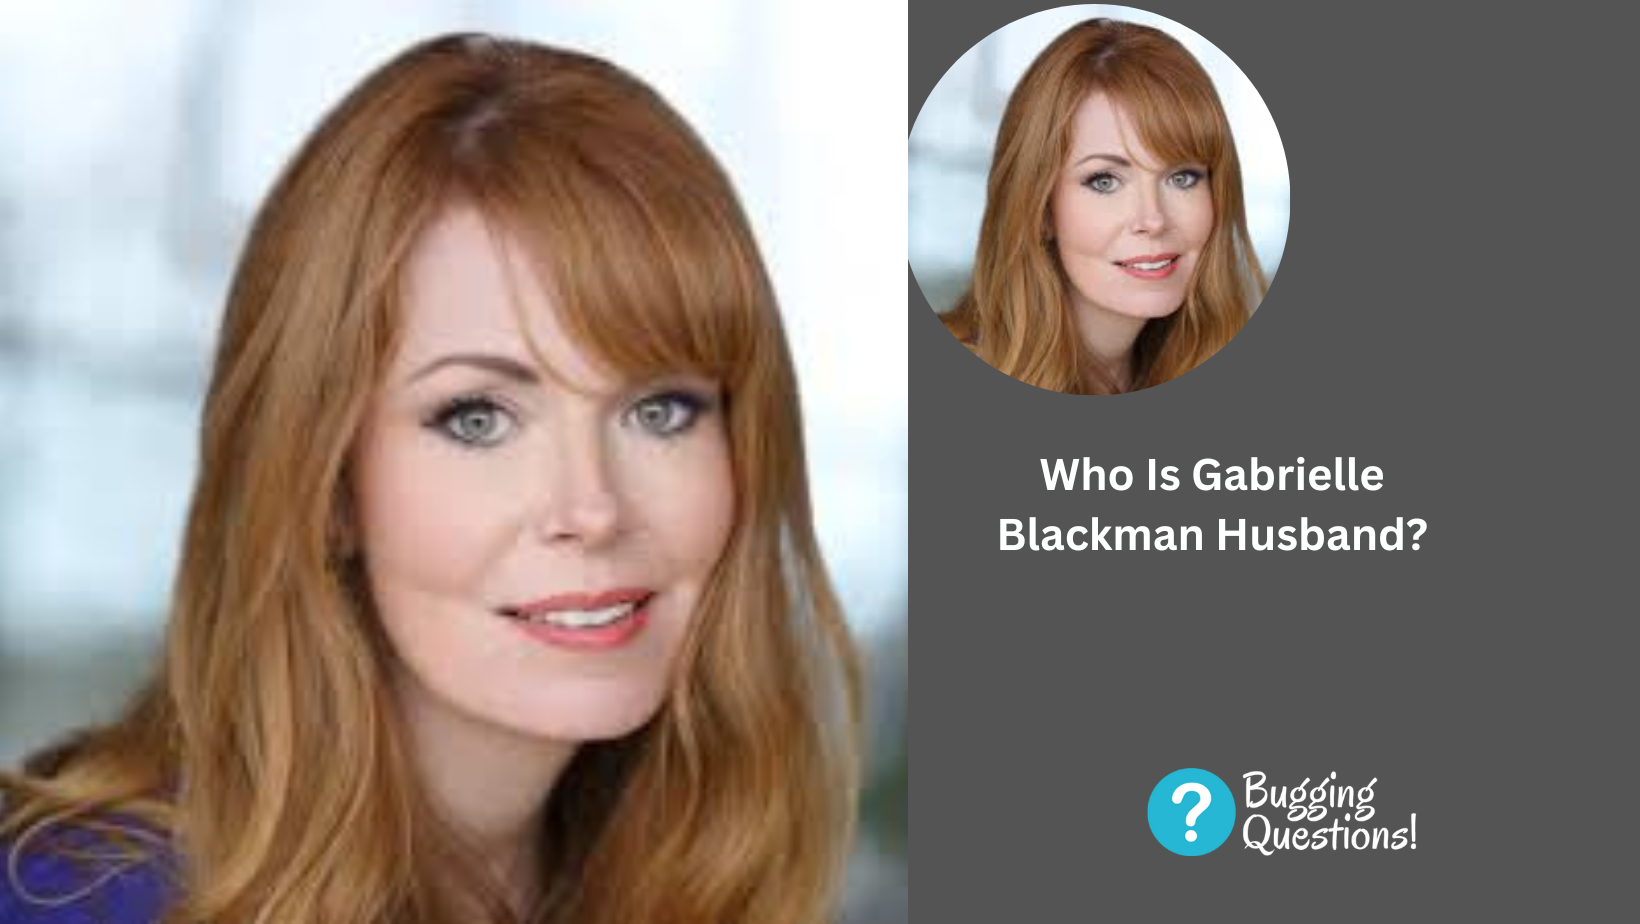 Who Is Gabrielle Blackman Husband? Know More About Their Personal Life And Relationship Timeline